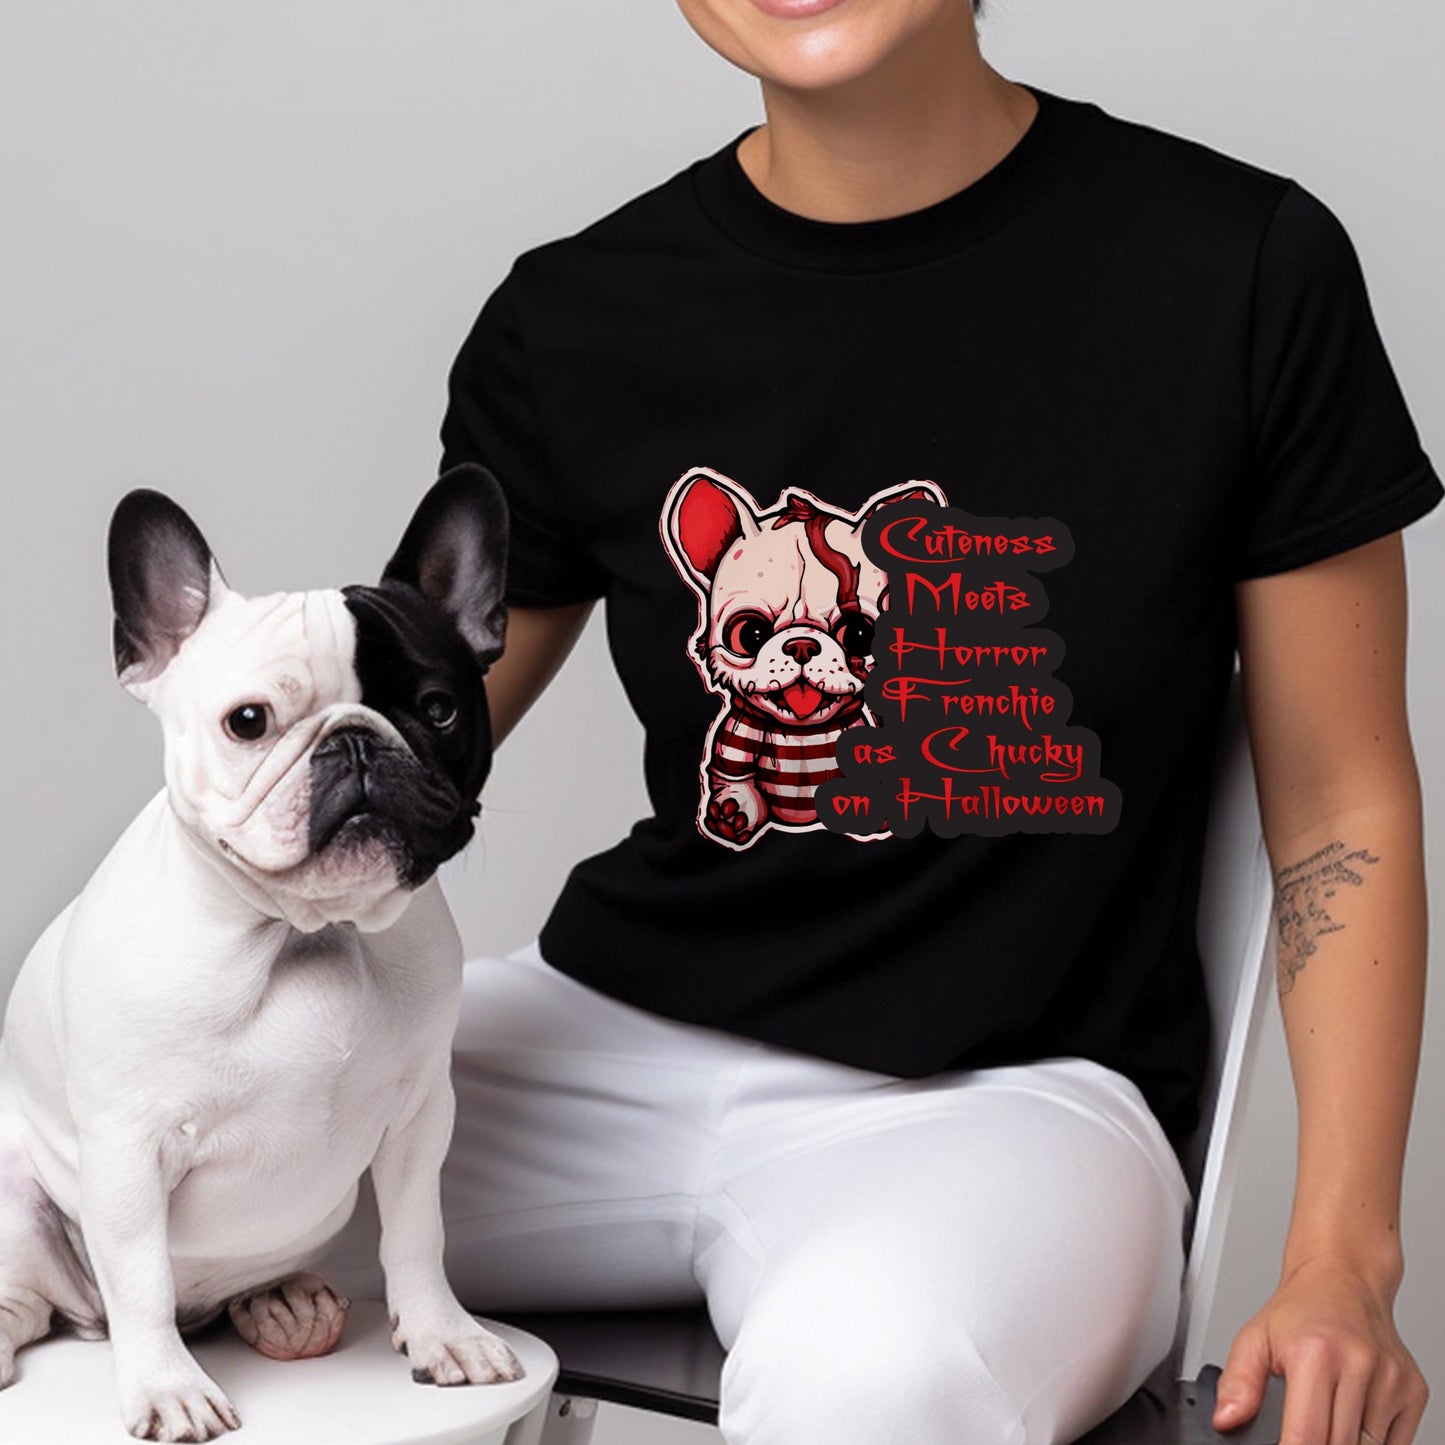 Frenchie's Chucky Makeover - Unisex T-Shirt